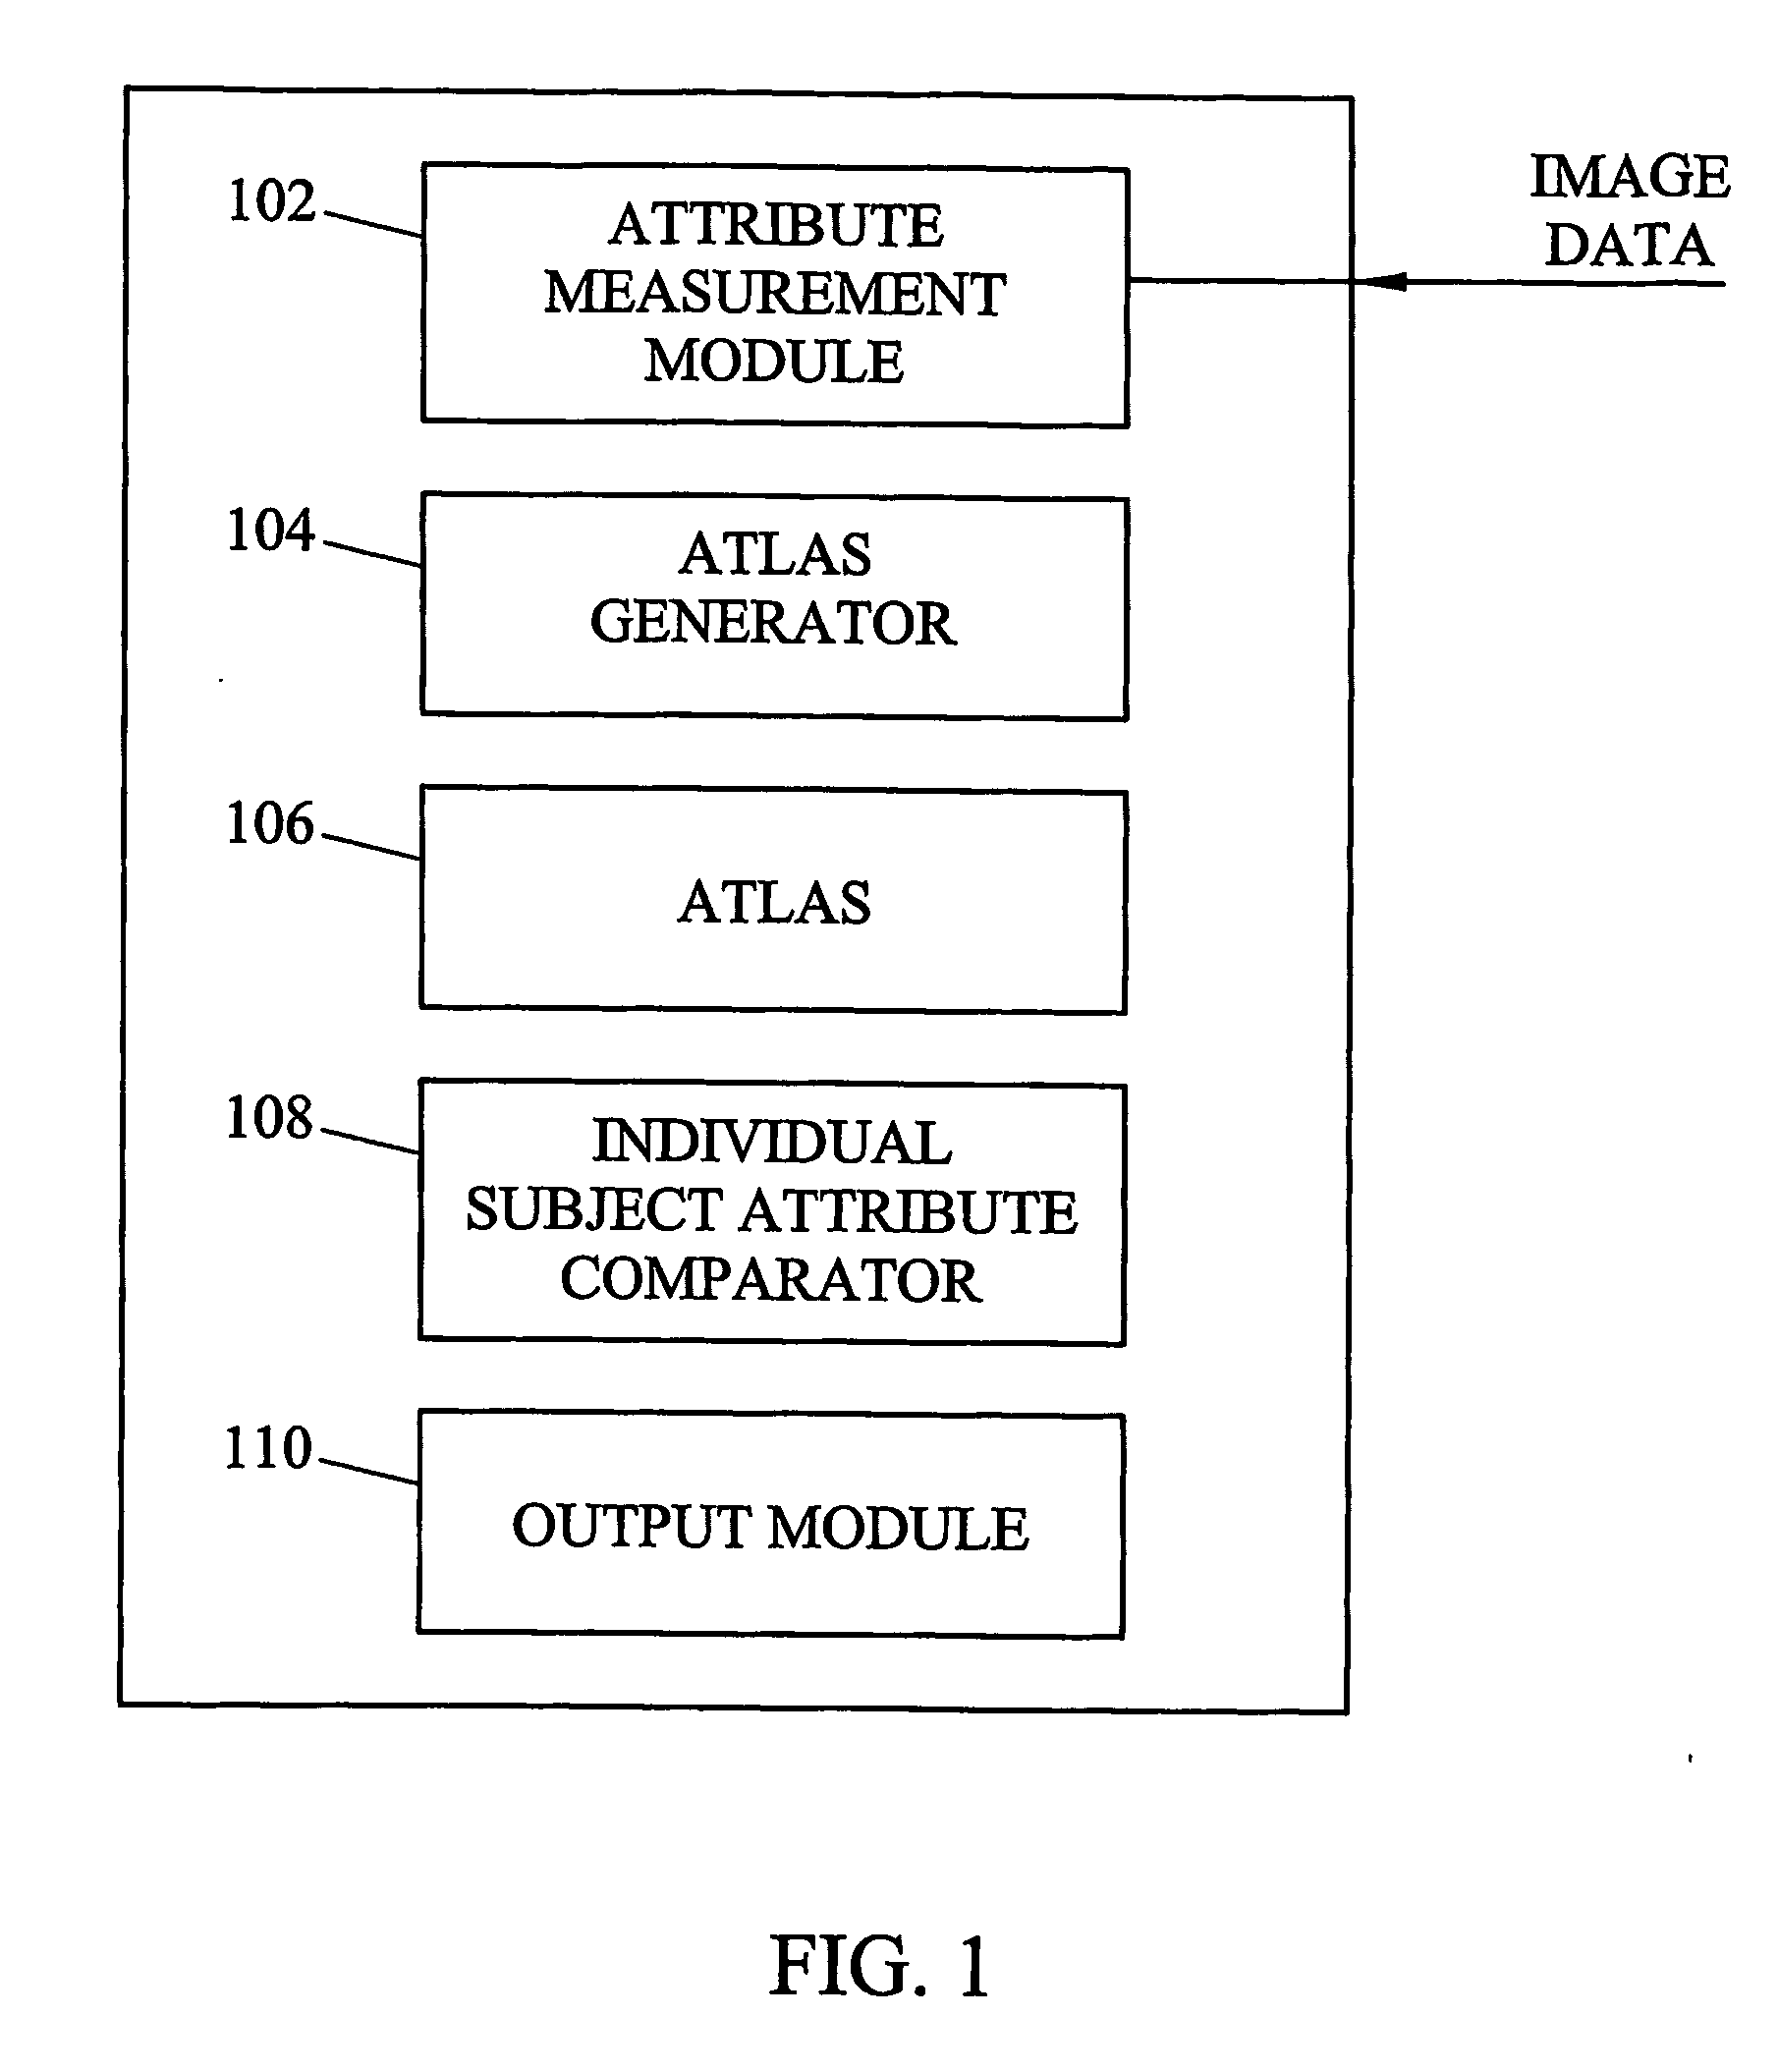 Systems, methods, and computer program products for analysis of vessel attributes for diagnosis, disease staging, and surfical planning